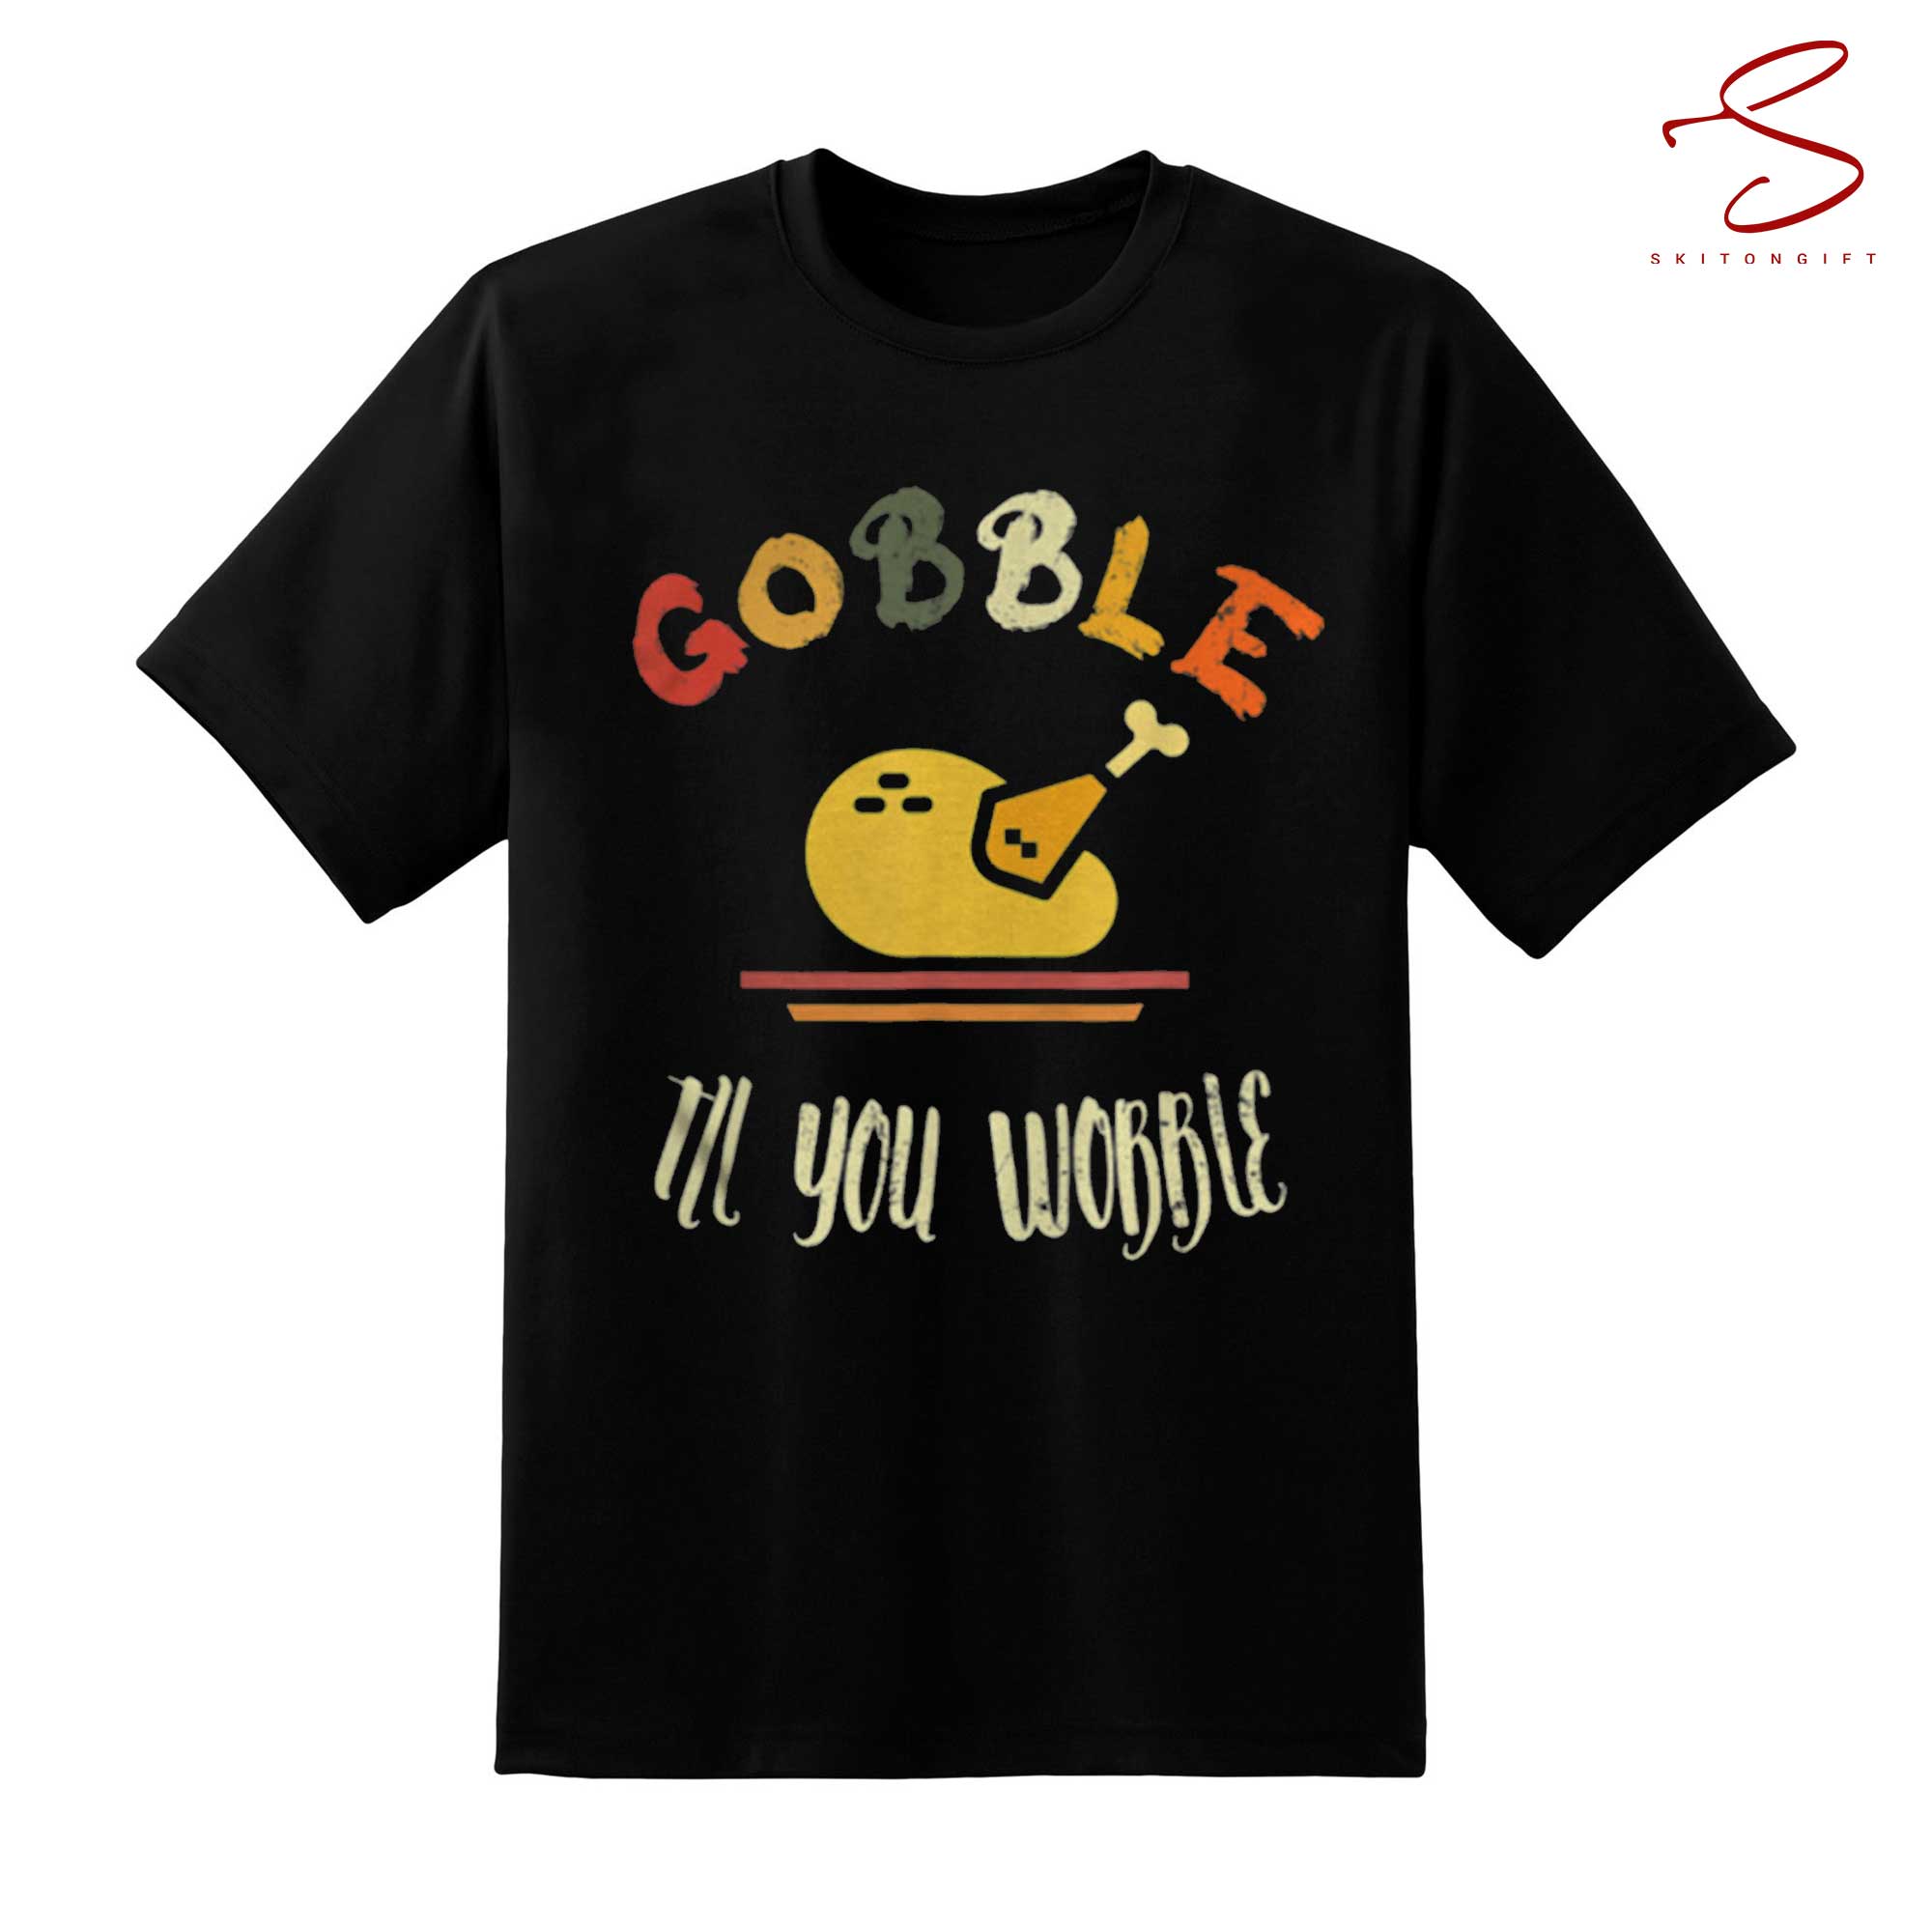 Skitongift Gobble Til You Wobble Turkey Leg Day Funny Thanksgiving T Shirt Funny Shirts Long Sleeve Tee Hoody Hoodie heavyweight pullover hoodies Sweater